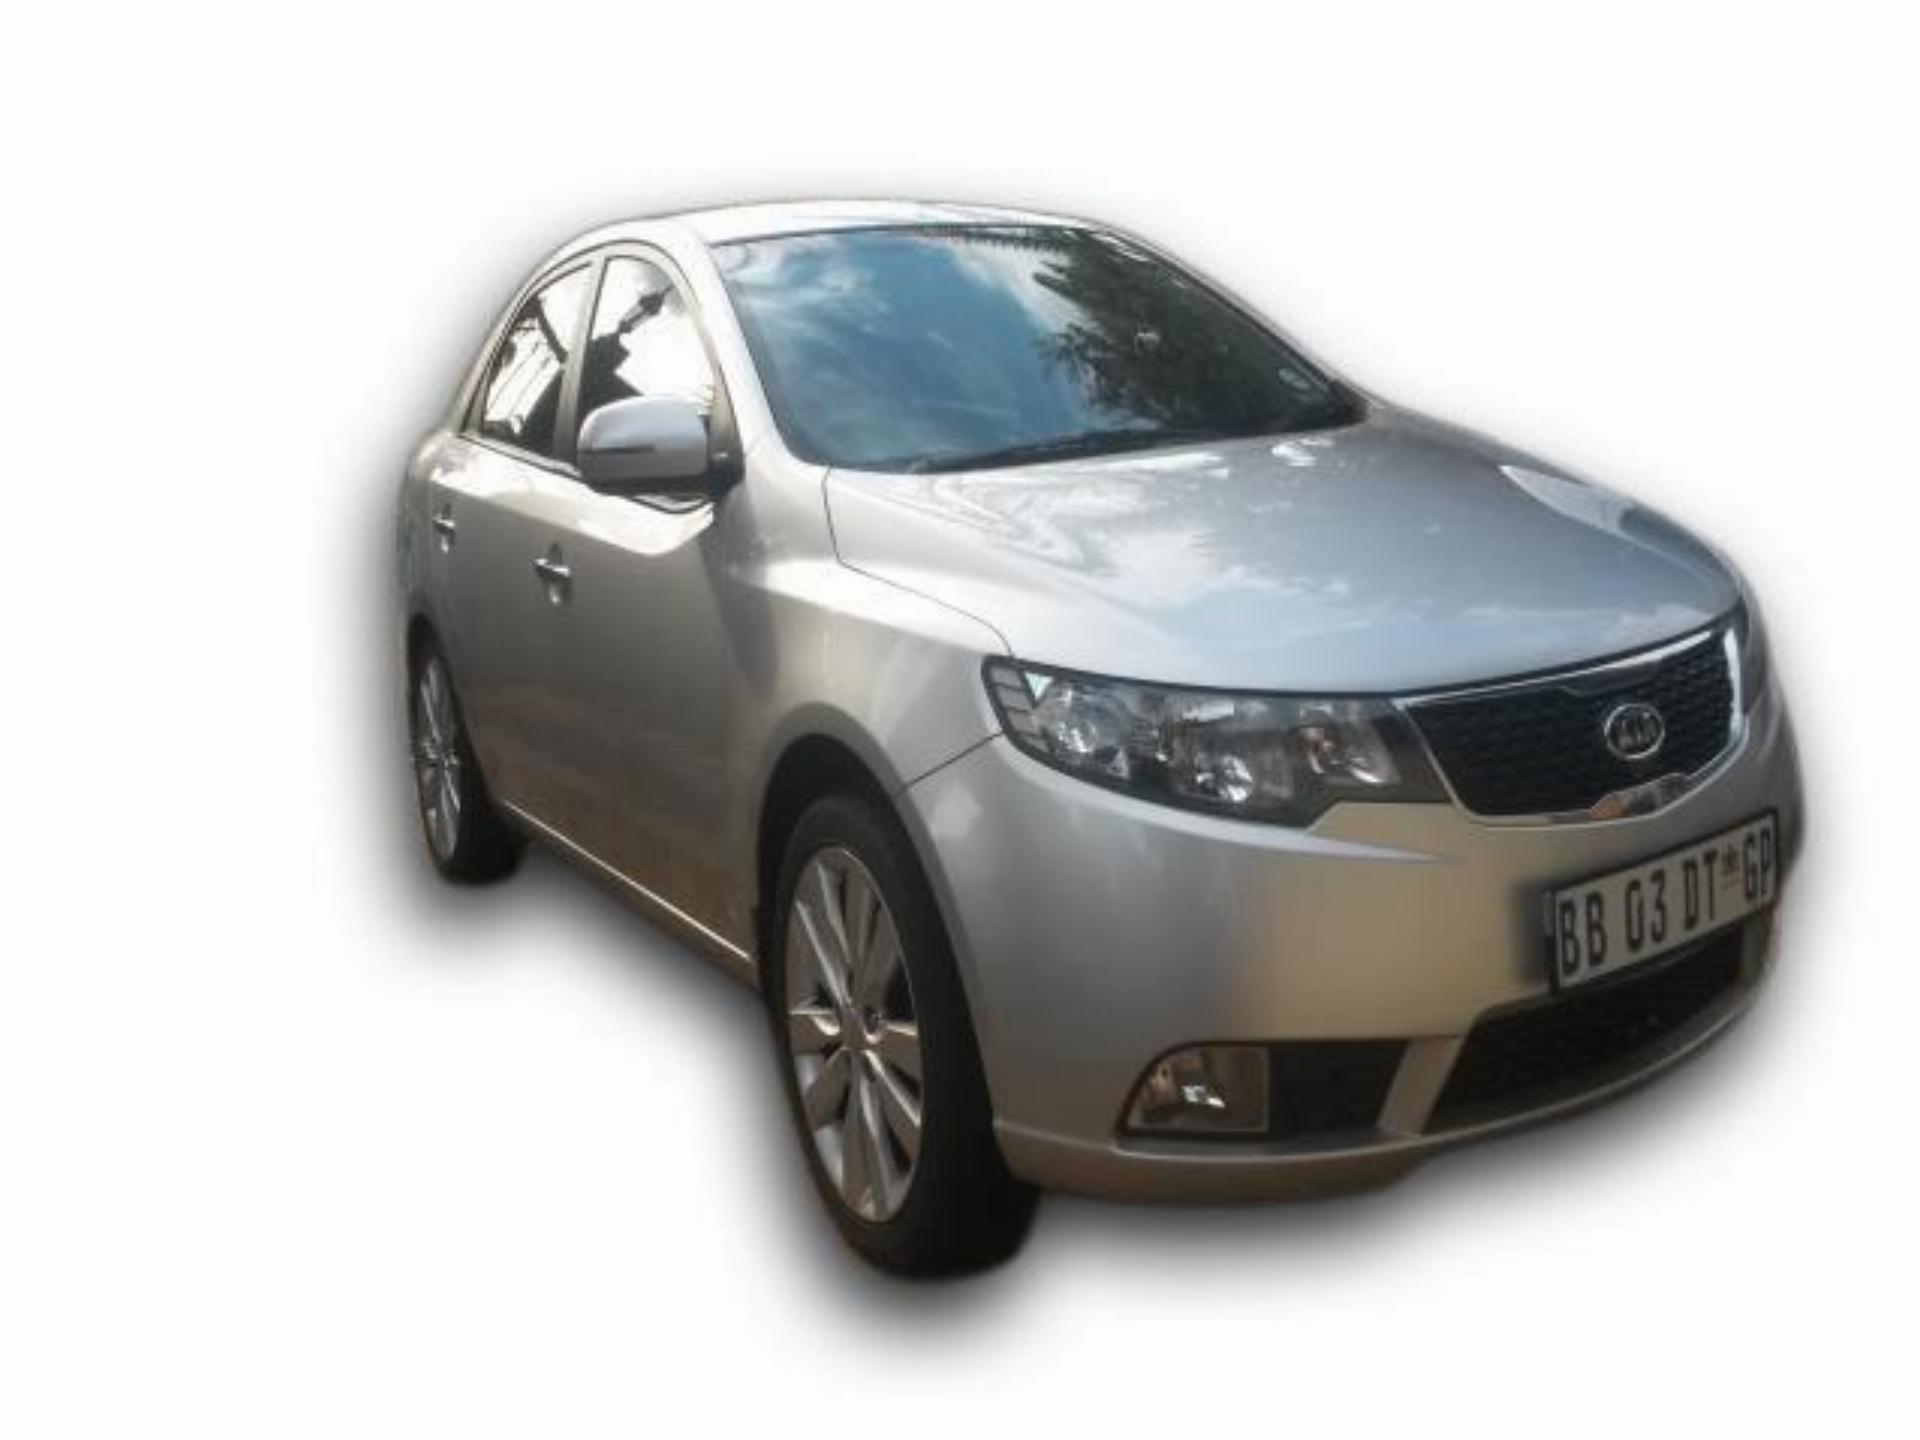 Used Kia Cerato 2.0 5DR 2010 on auction - PV1004712